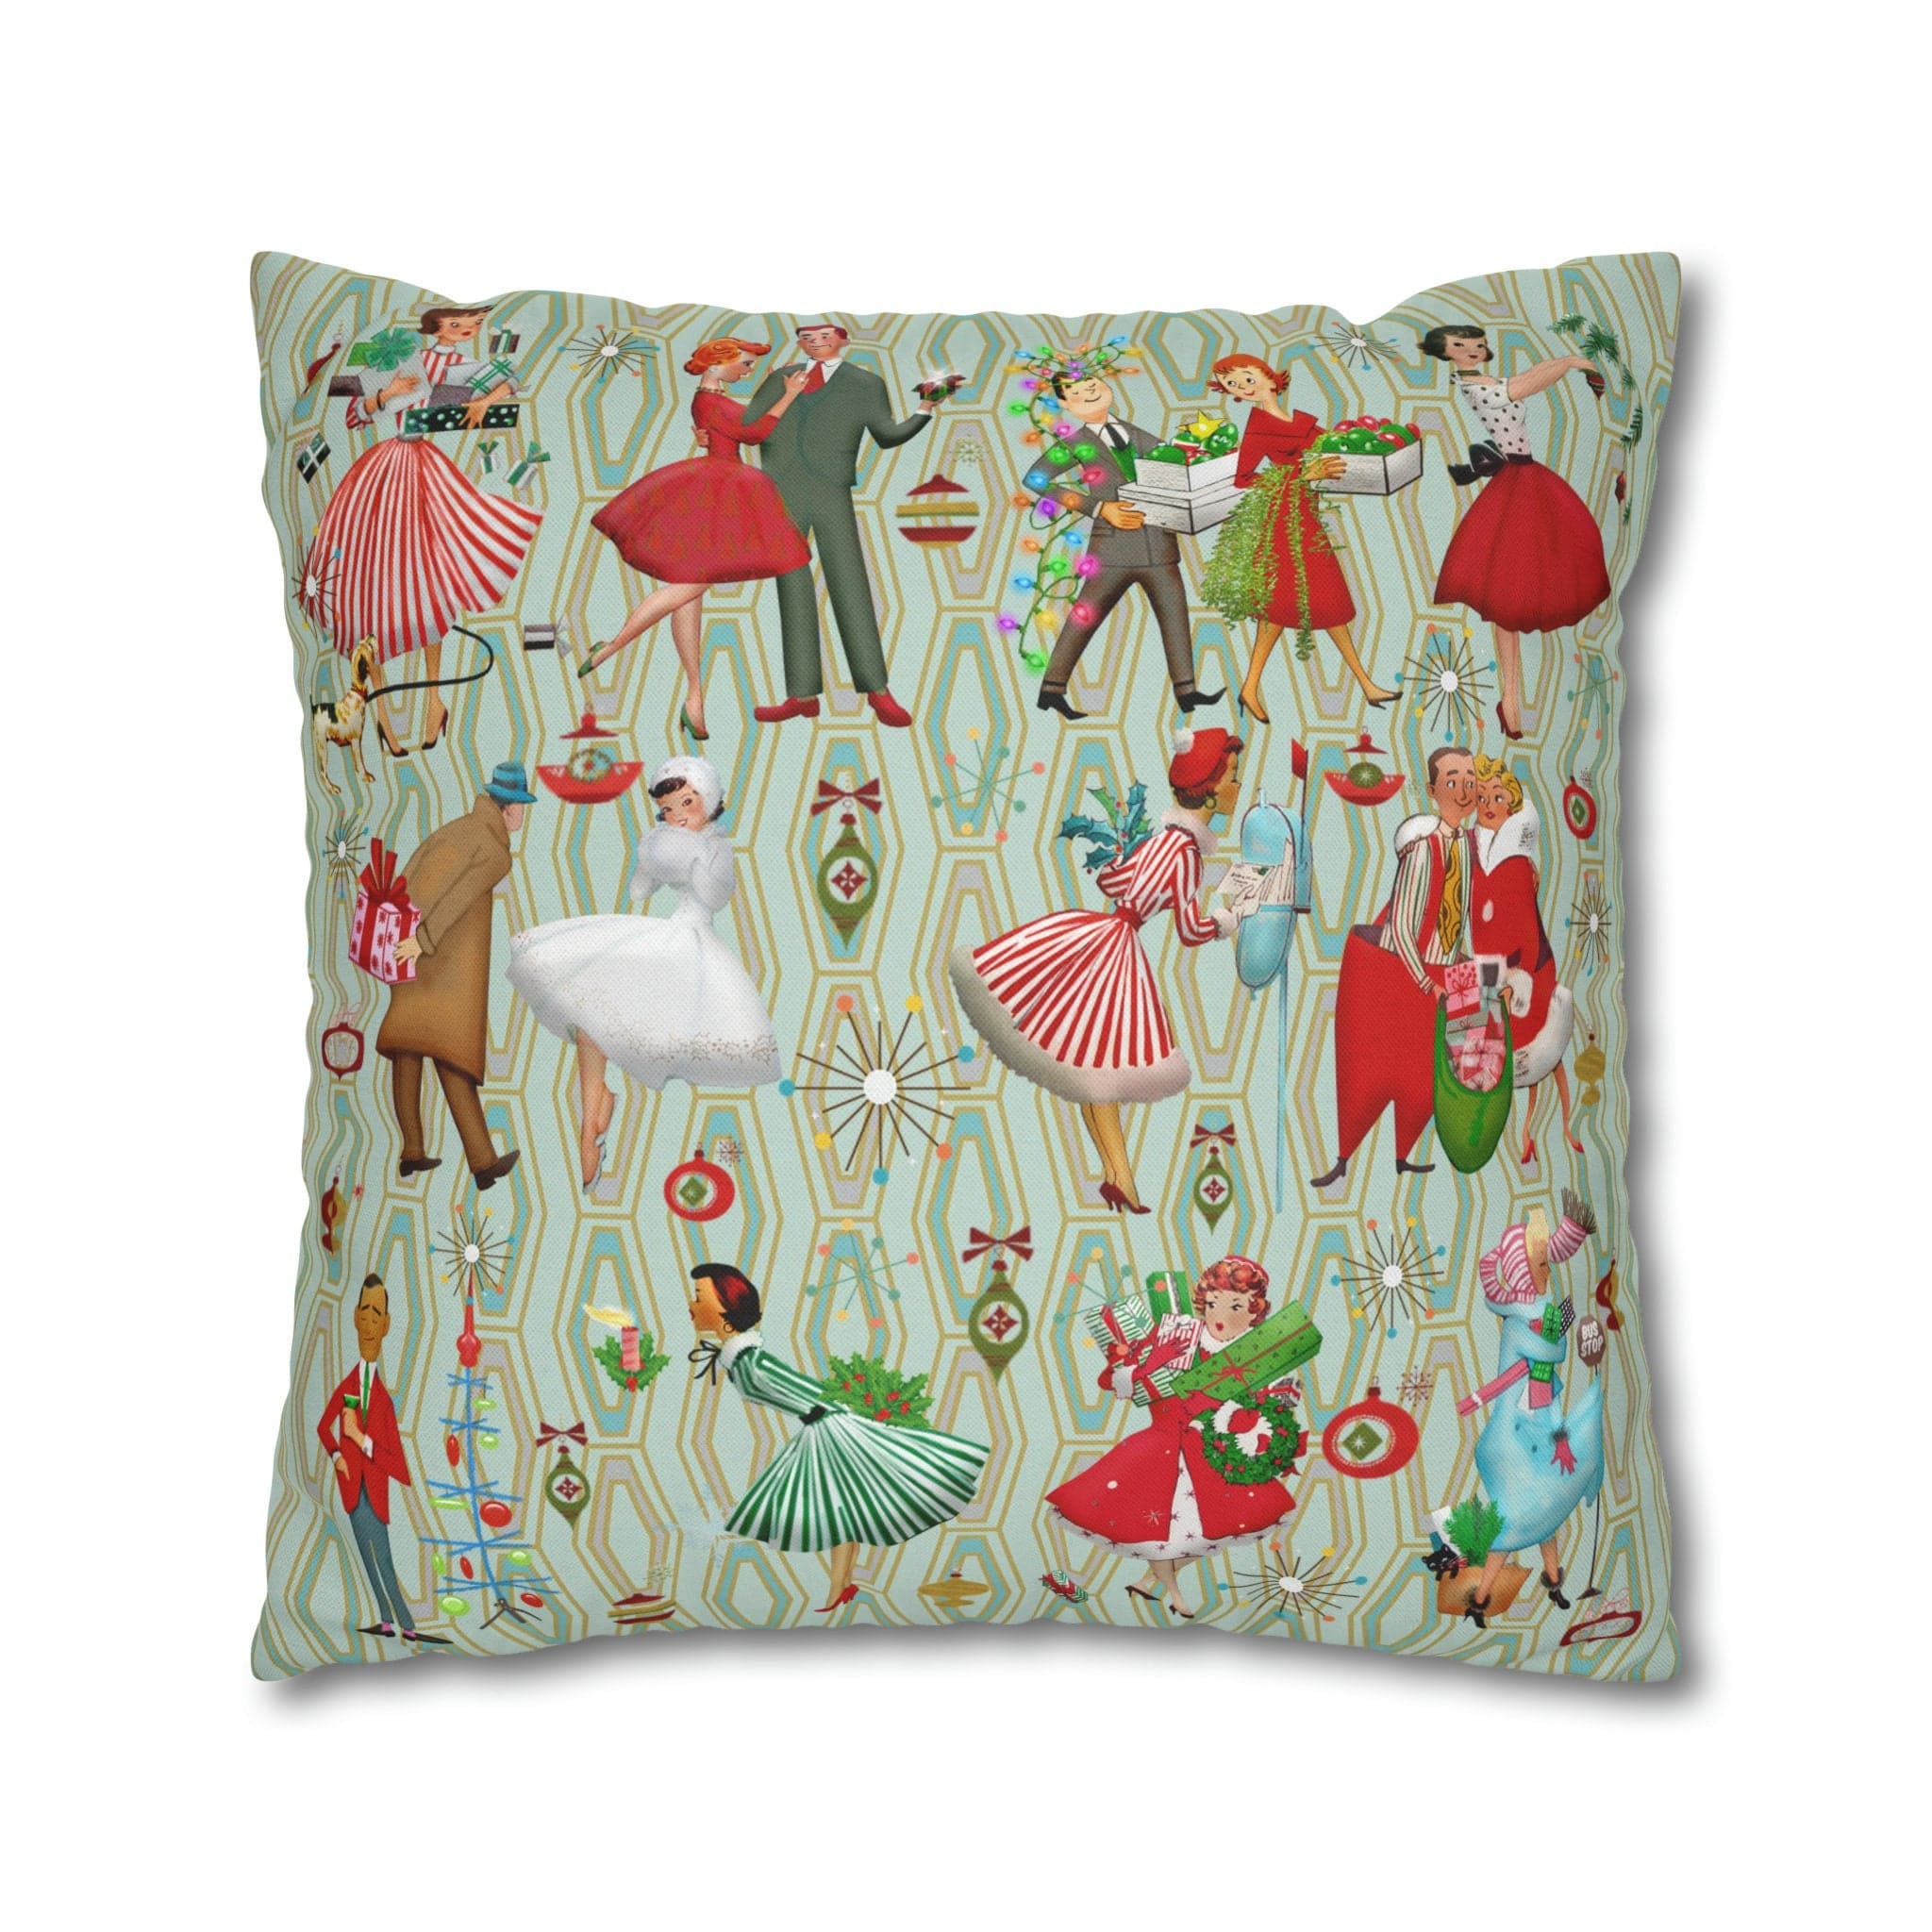 Kate McEnroe New York 1950s Retro Vintage Kitsch Christmas Pillow Cover, Vintage Housewives, Couples Xmas Card Inspired Art, MCM Holiday DecorThrow Pillow Covers86356614111959756057